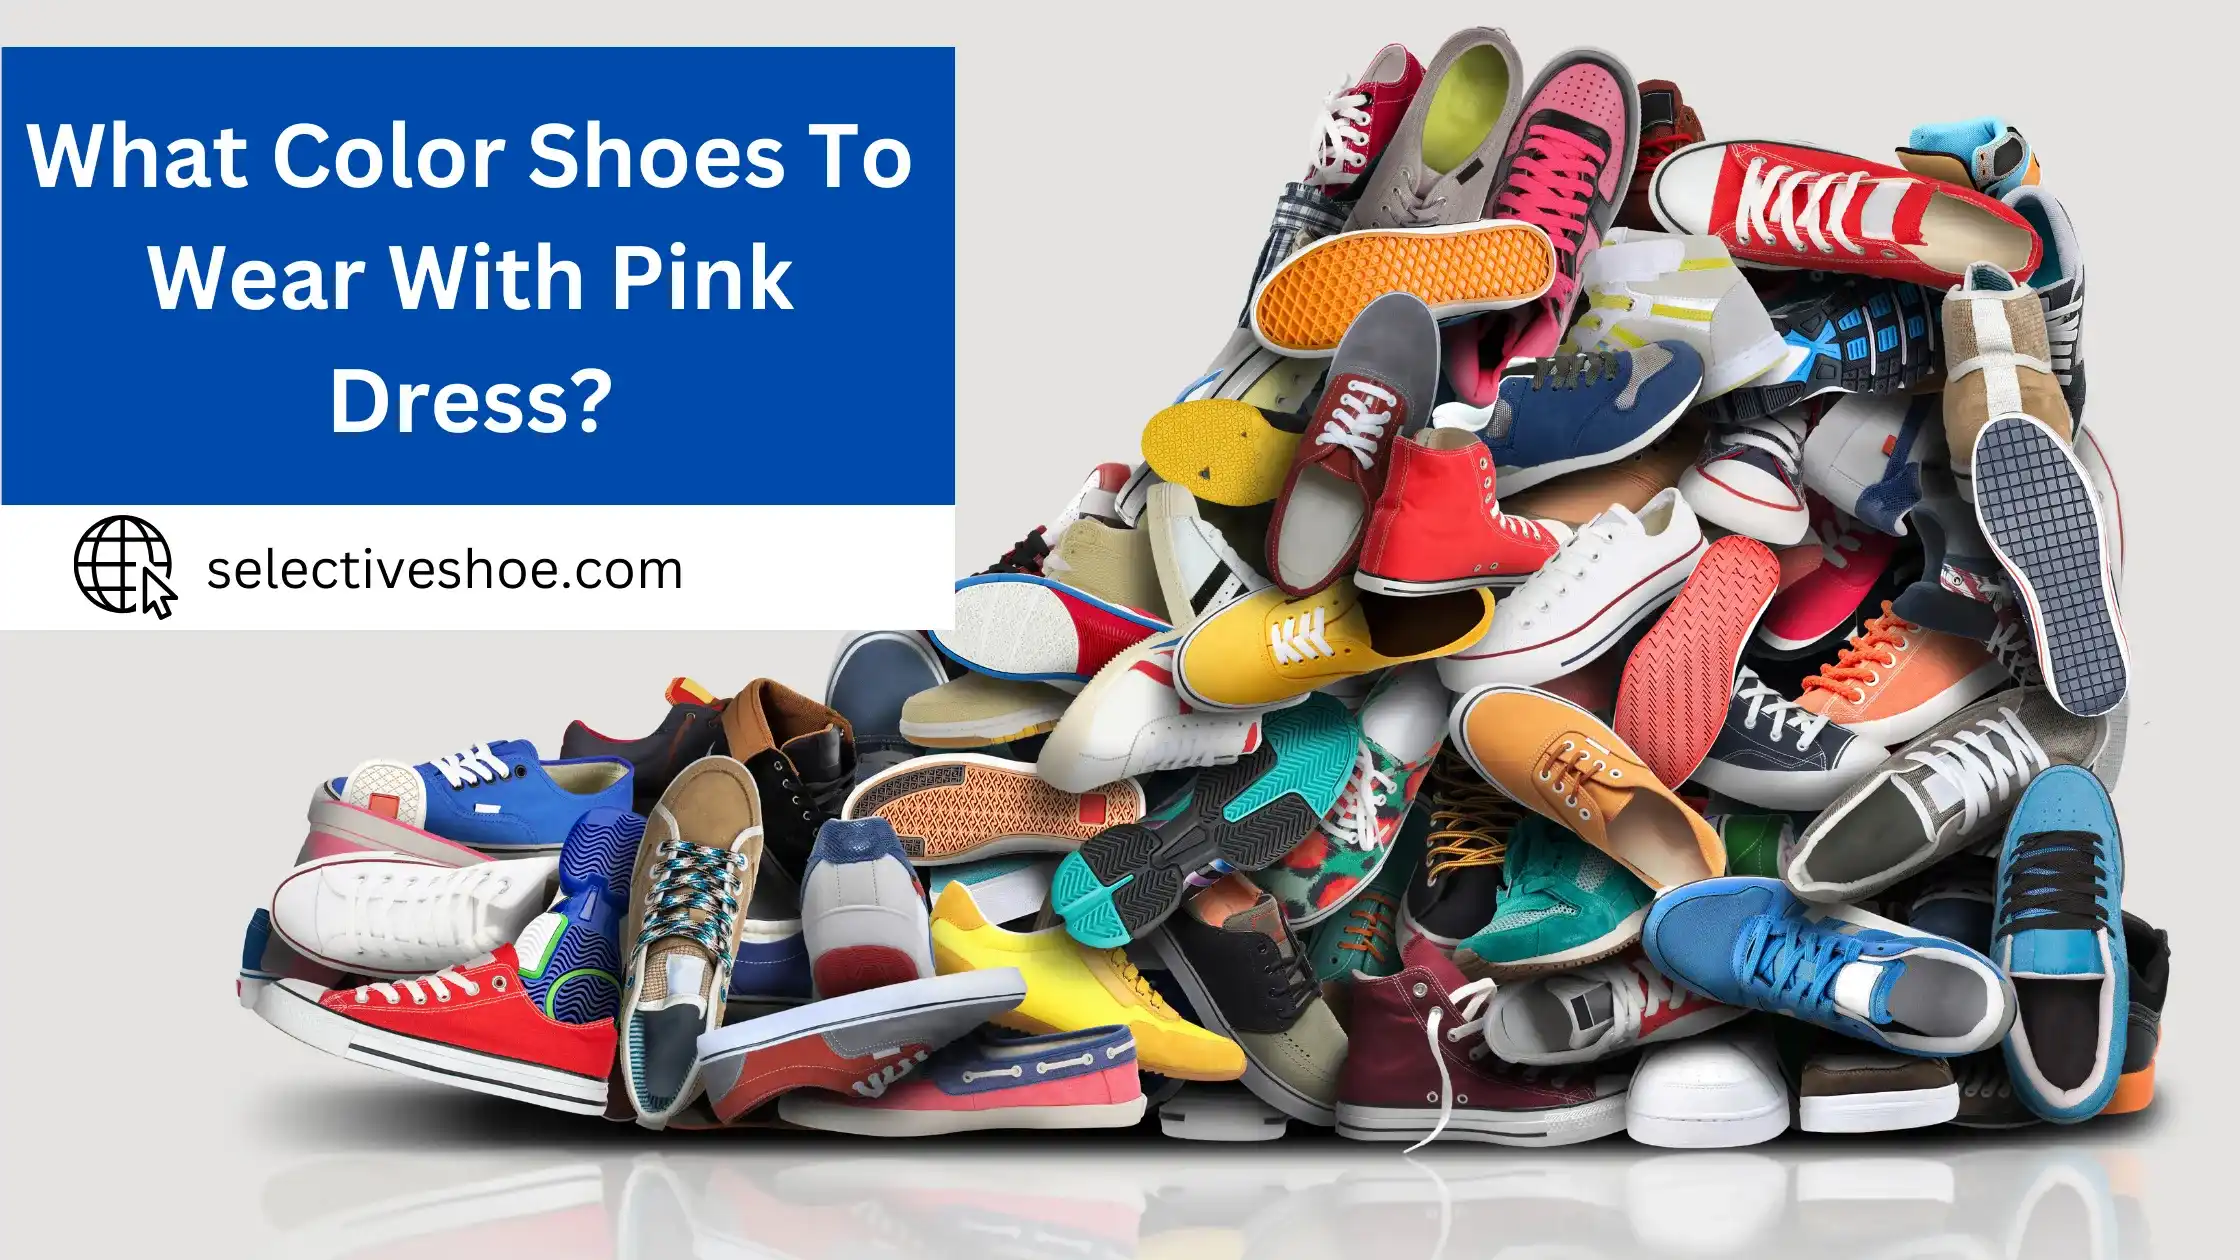 What Color Shoes to Wear With Pink Dress? A Detailed Analysis